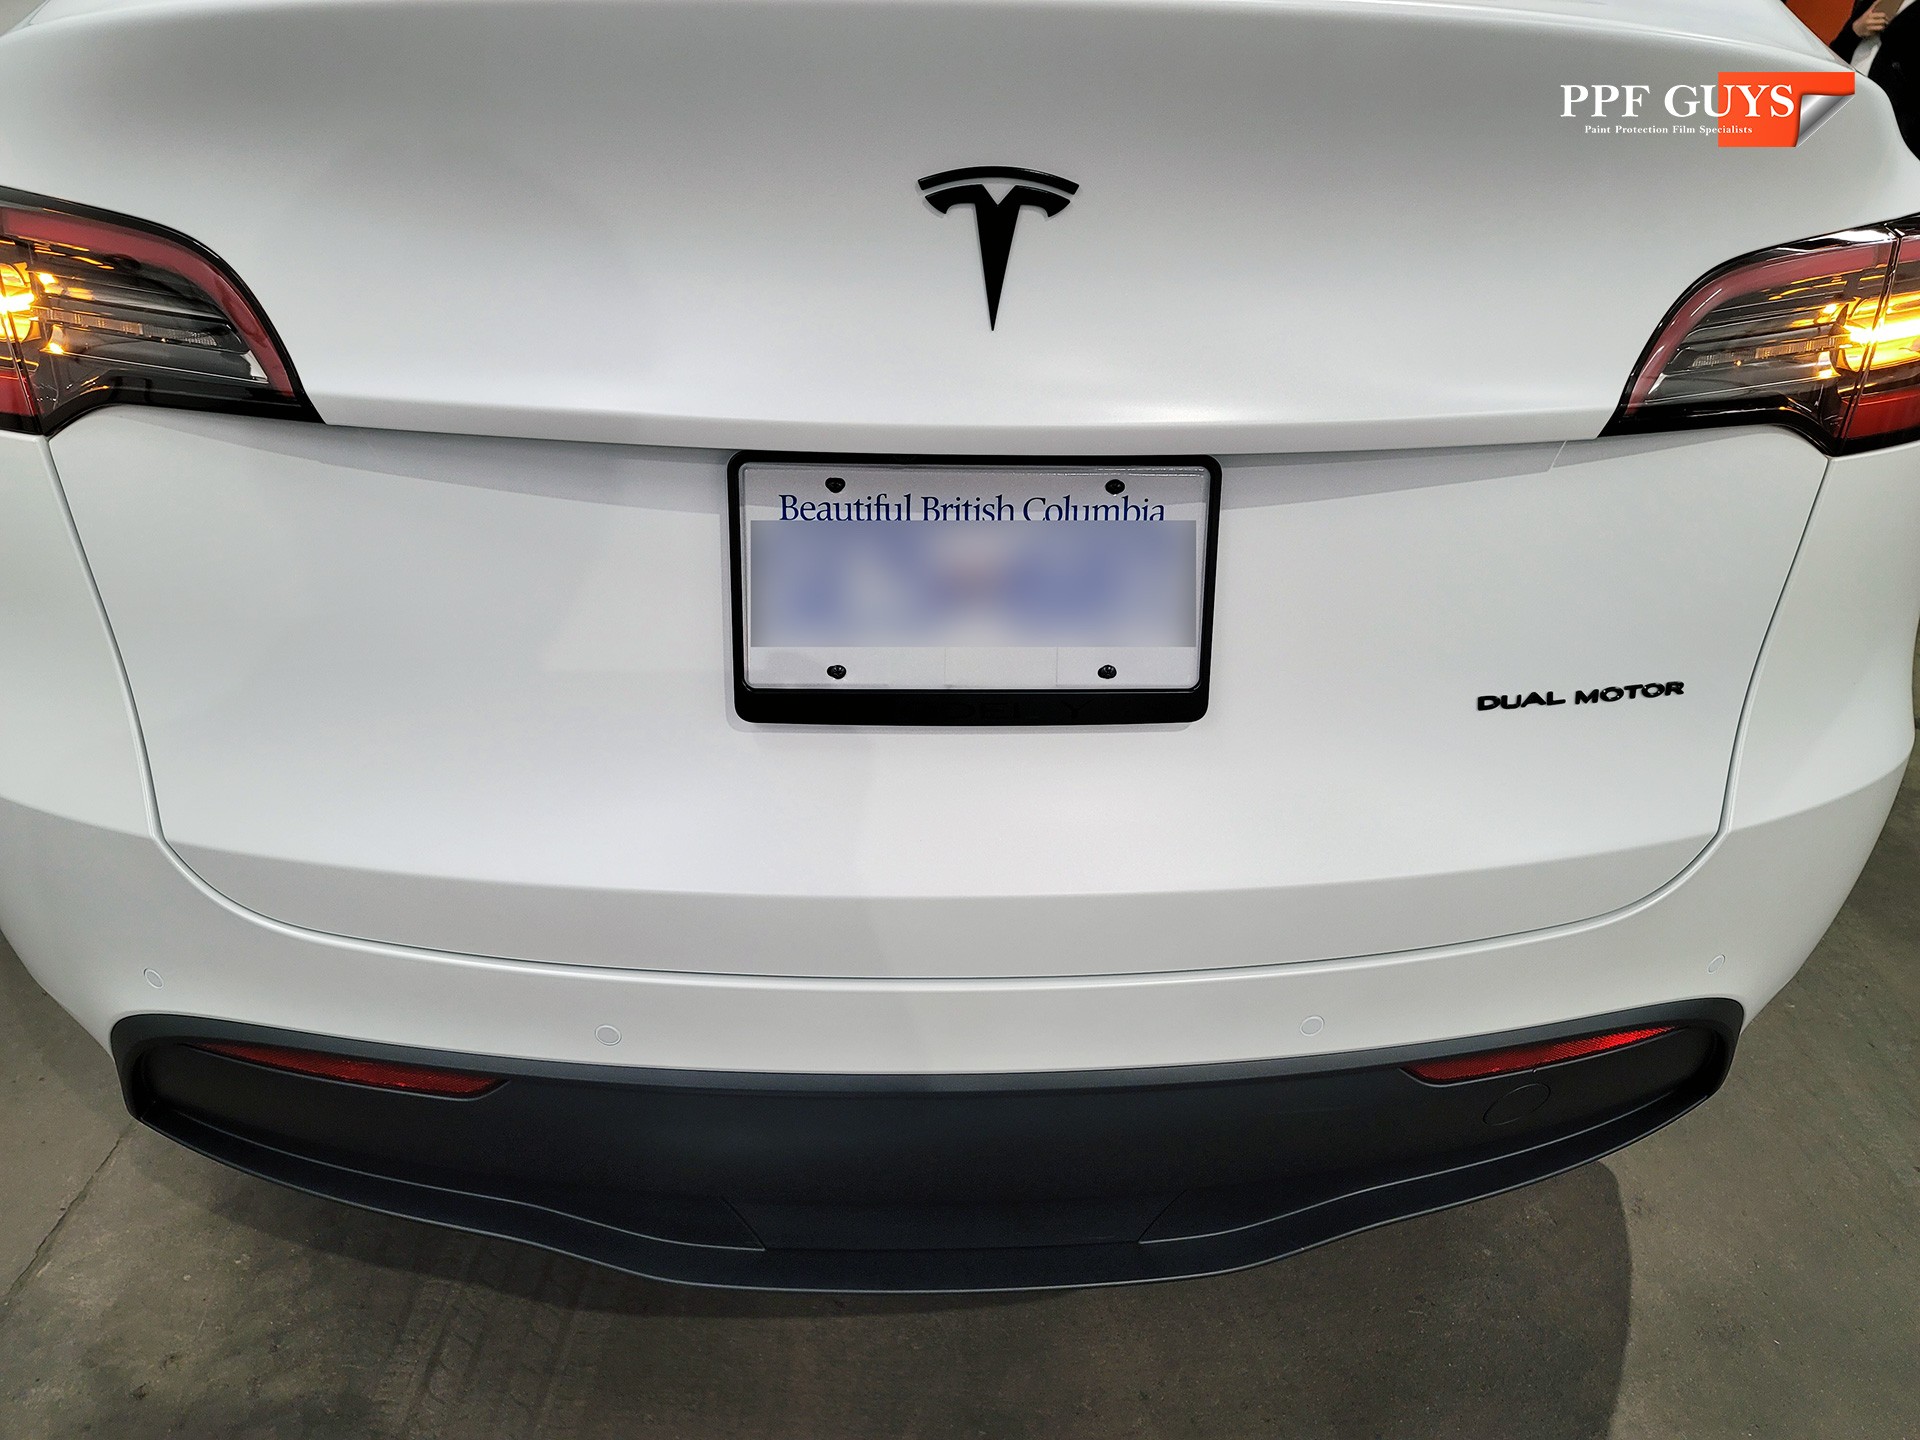 PPF Guys Model Y White Xpel Stealth, ceramic, painted emblems (31).jpg